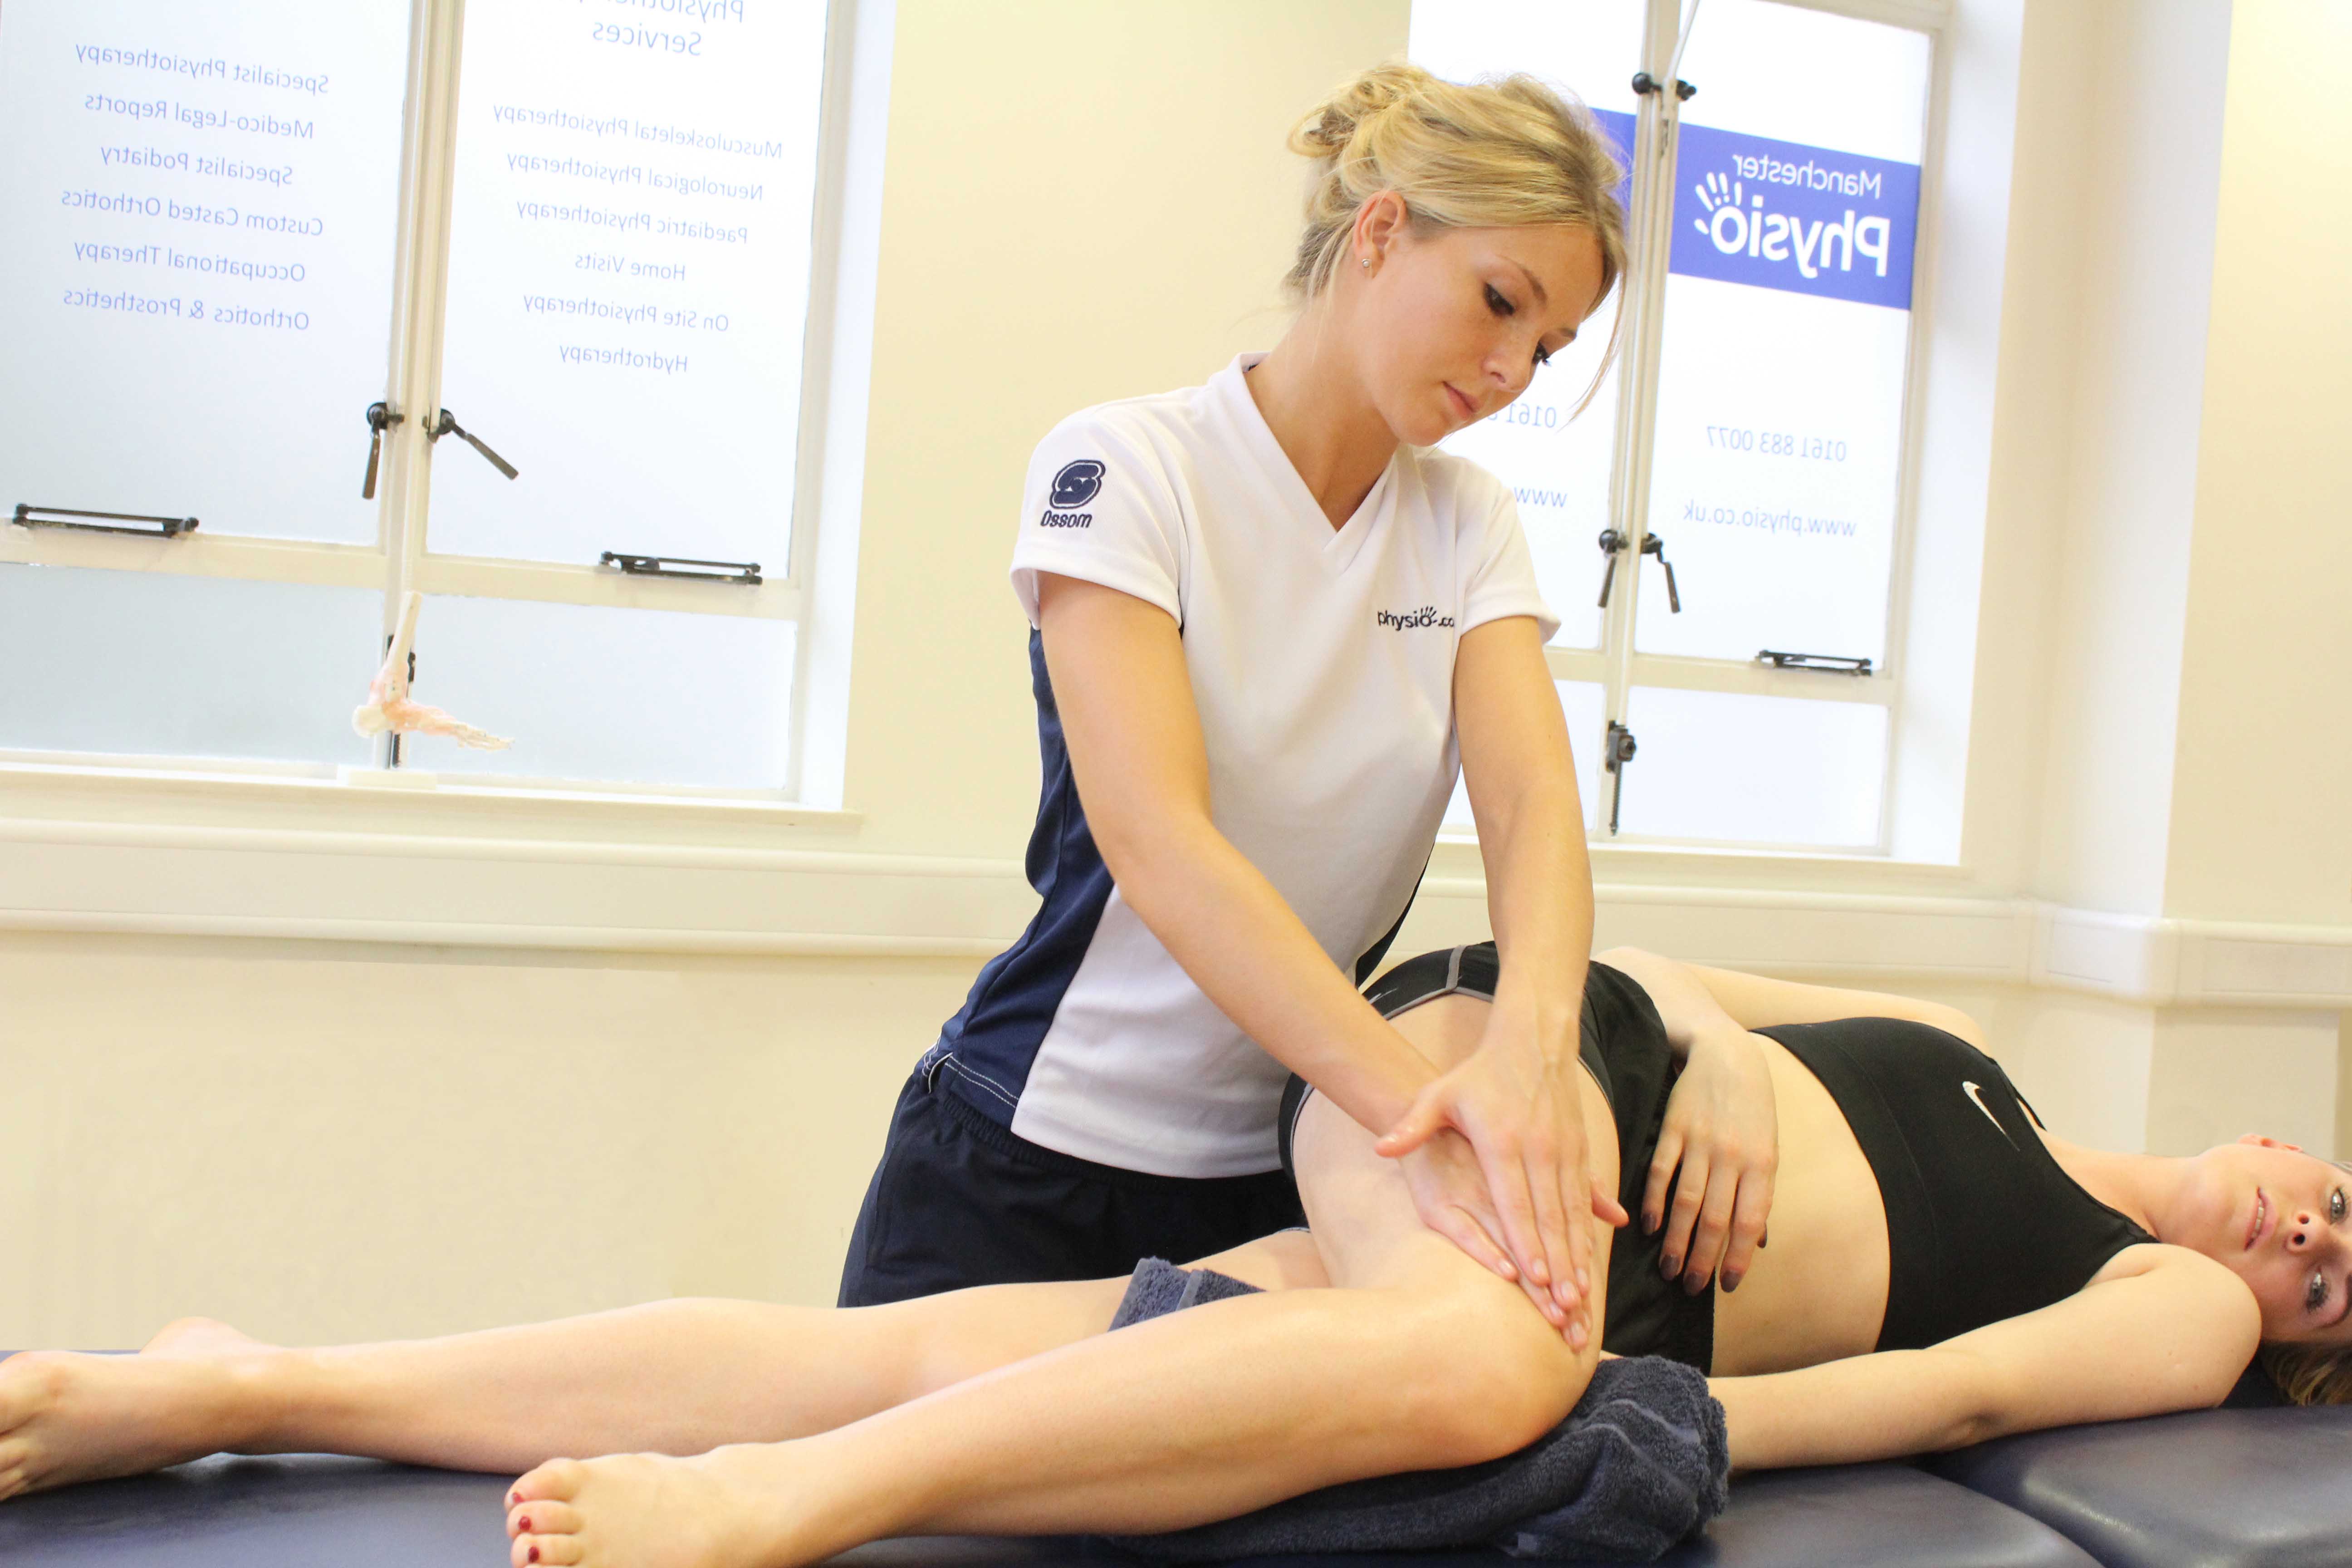 Soft tissue massage of the connective tissue around the patella and knee joint